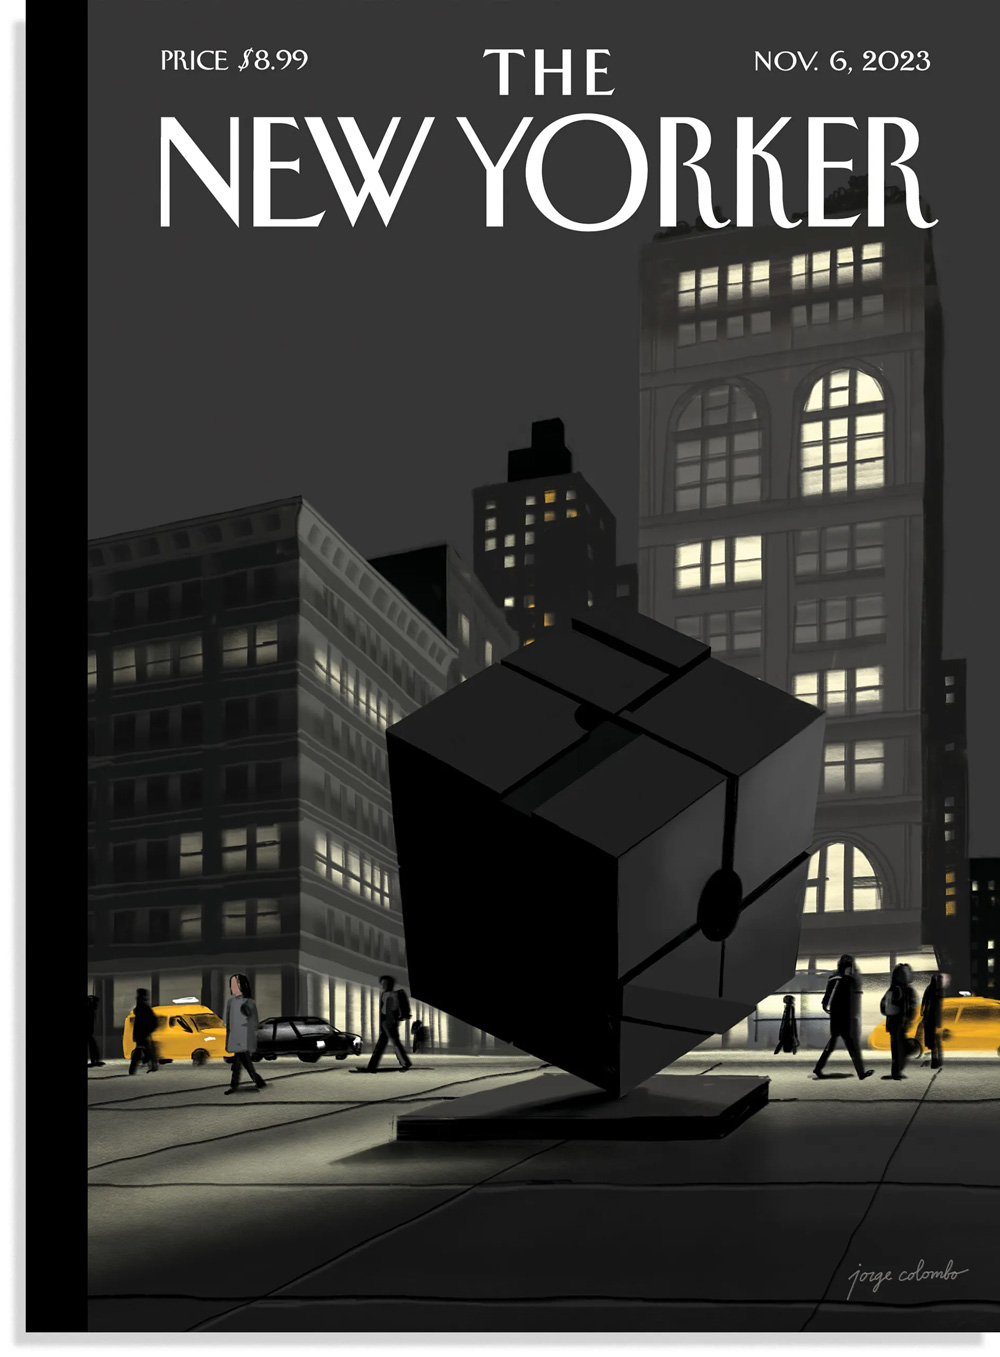 The New Yorker Cover Story Nov. 6 2023 Issue